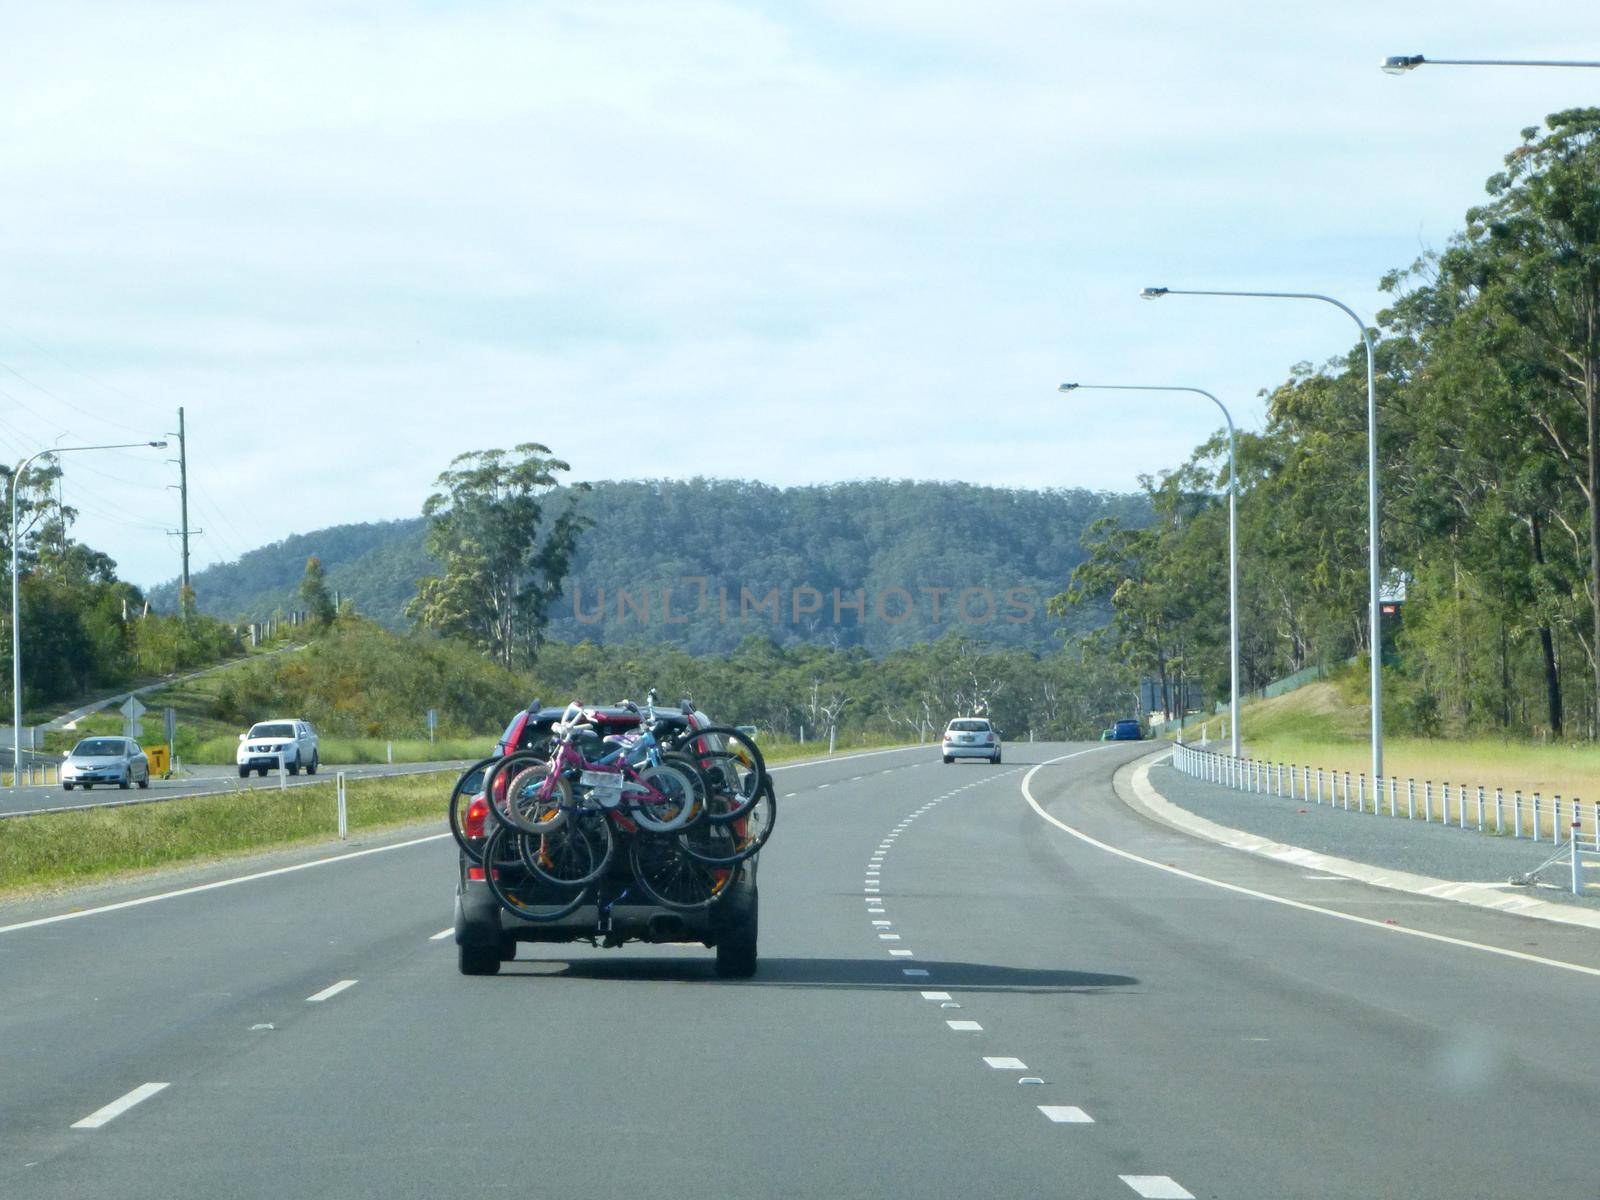 Family outing for a day of off road cycling with bicycles of all sizes strapped to a carrier on the back of a car traveling along a freeway